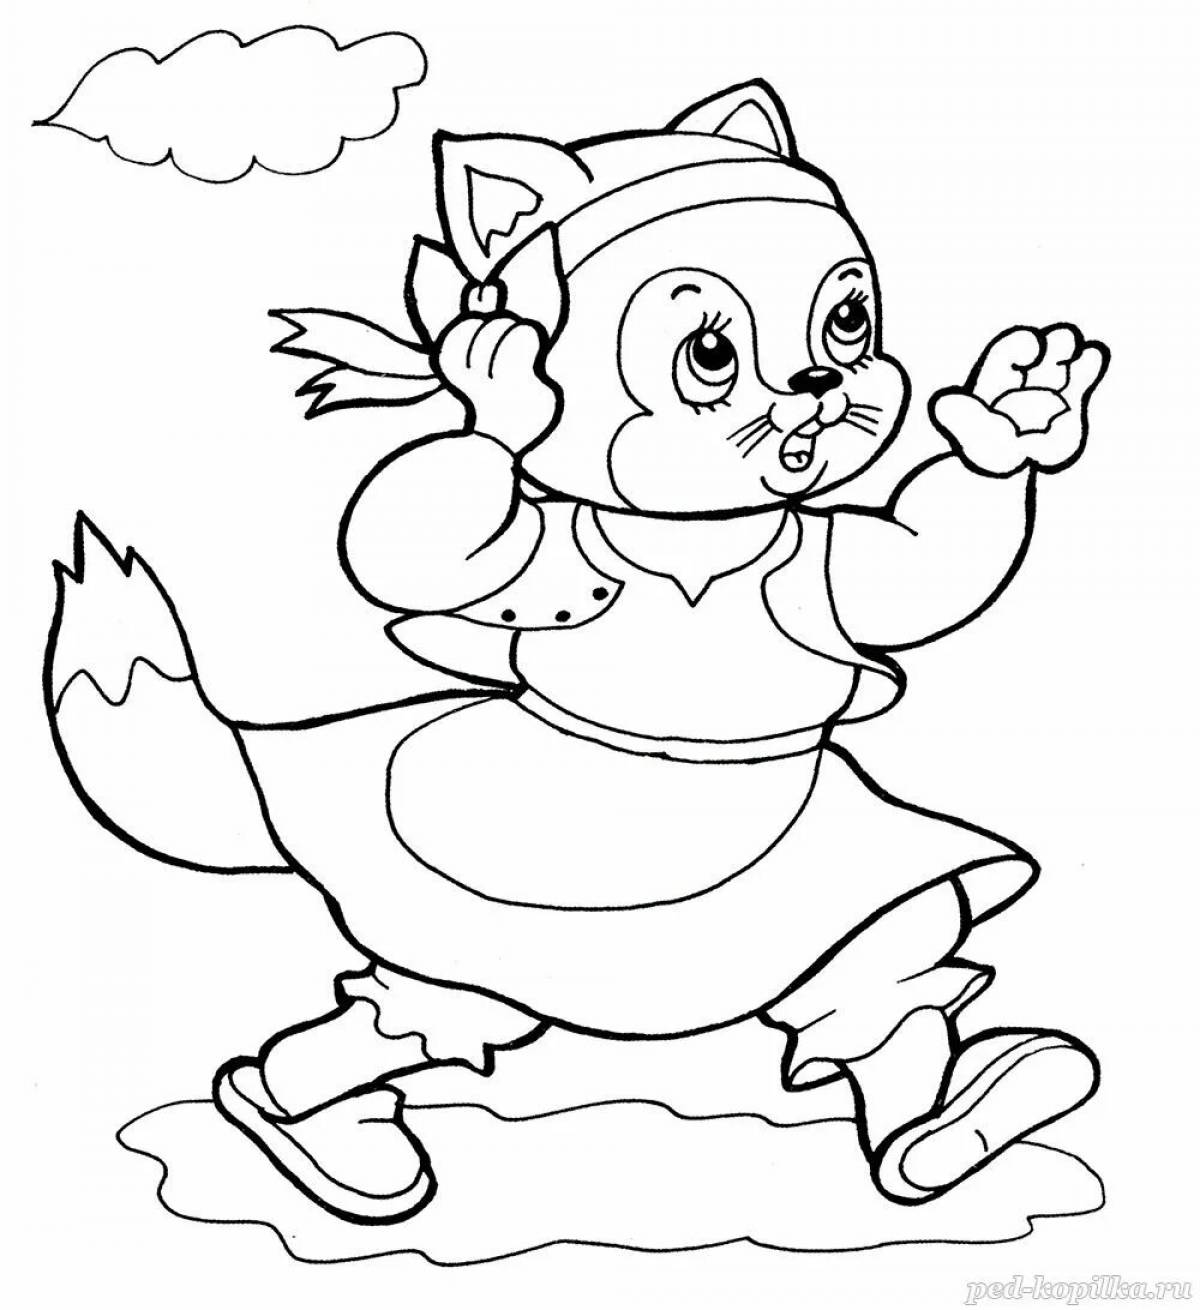 Unbeatable cat house coloring page for toddlers